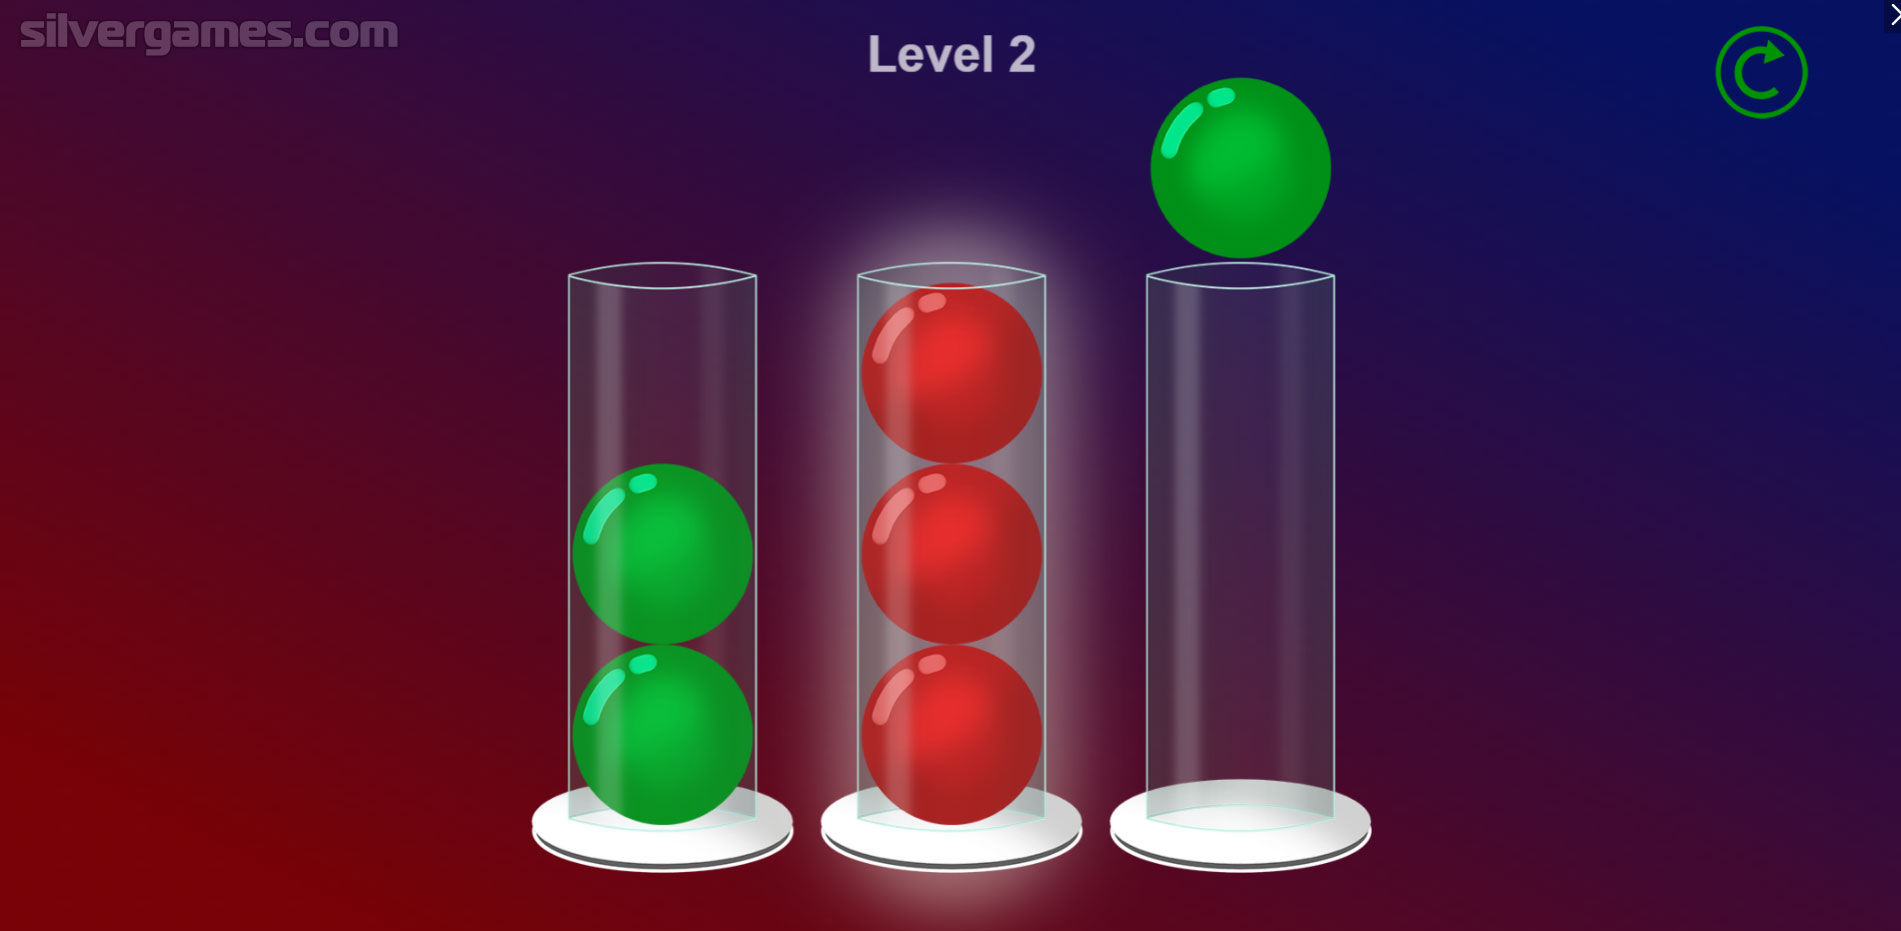 BUBBLE SORTING - Play Online for Free!